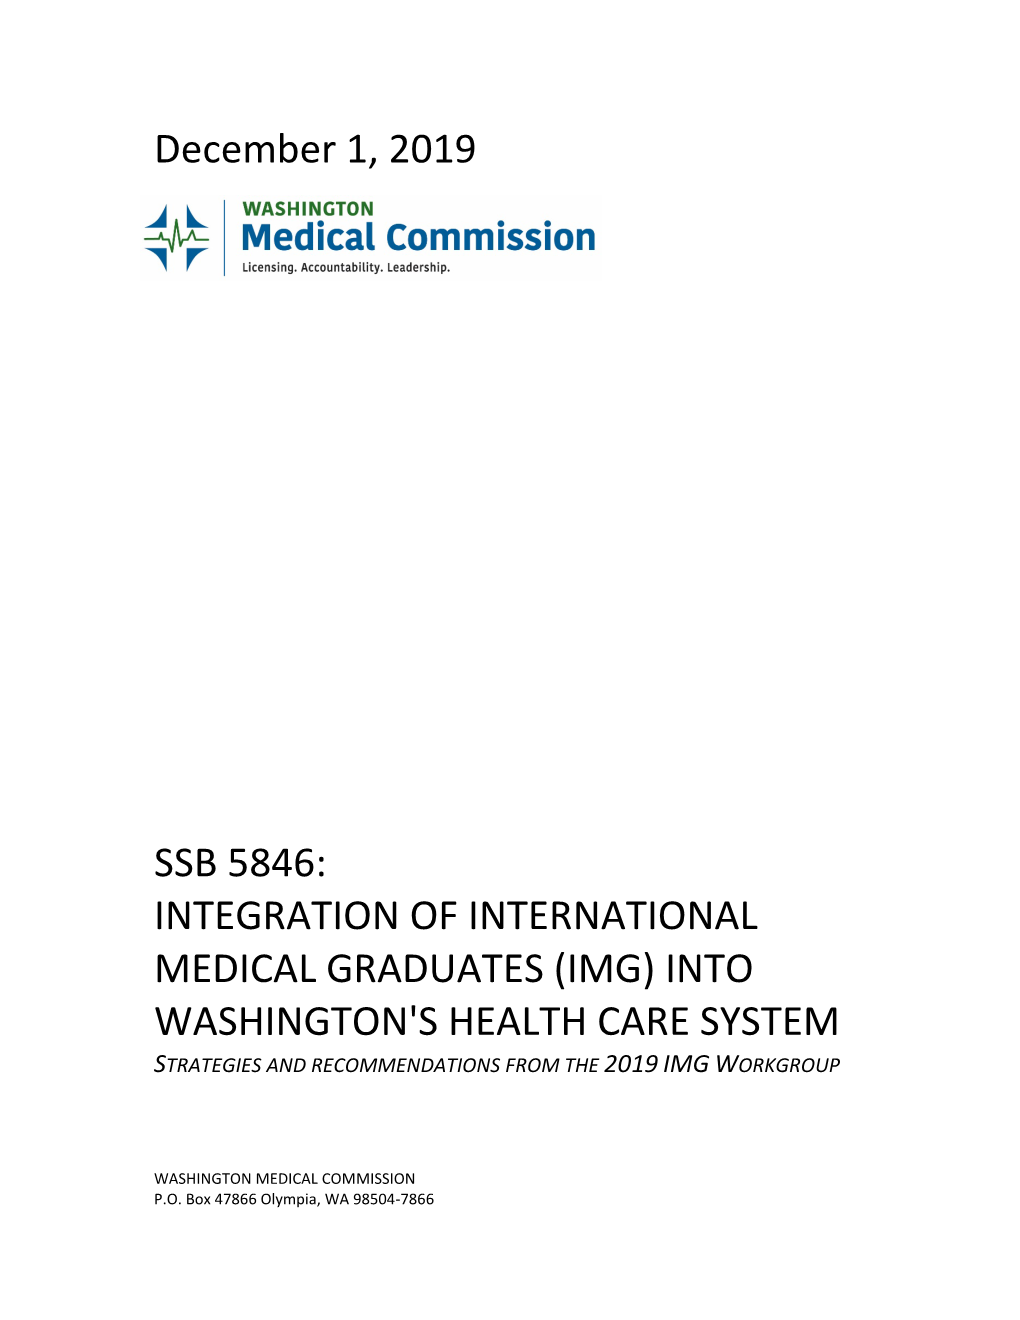 Ssb 5846: Integration of International Medical Graduates (Img) Into Washington's Health Care System Strategies and Recommendations from the 2019 Img Workgroup